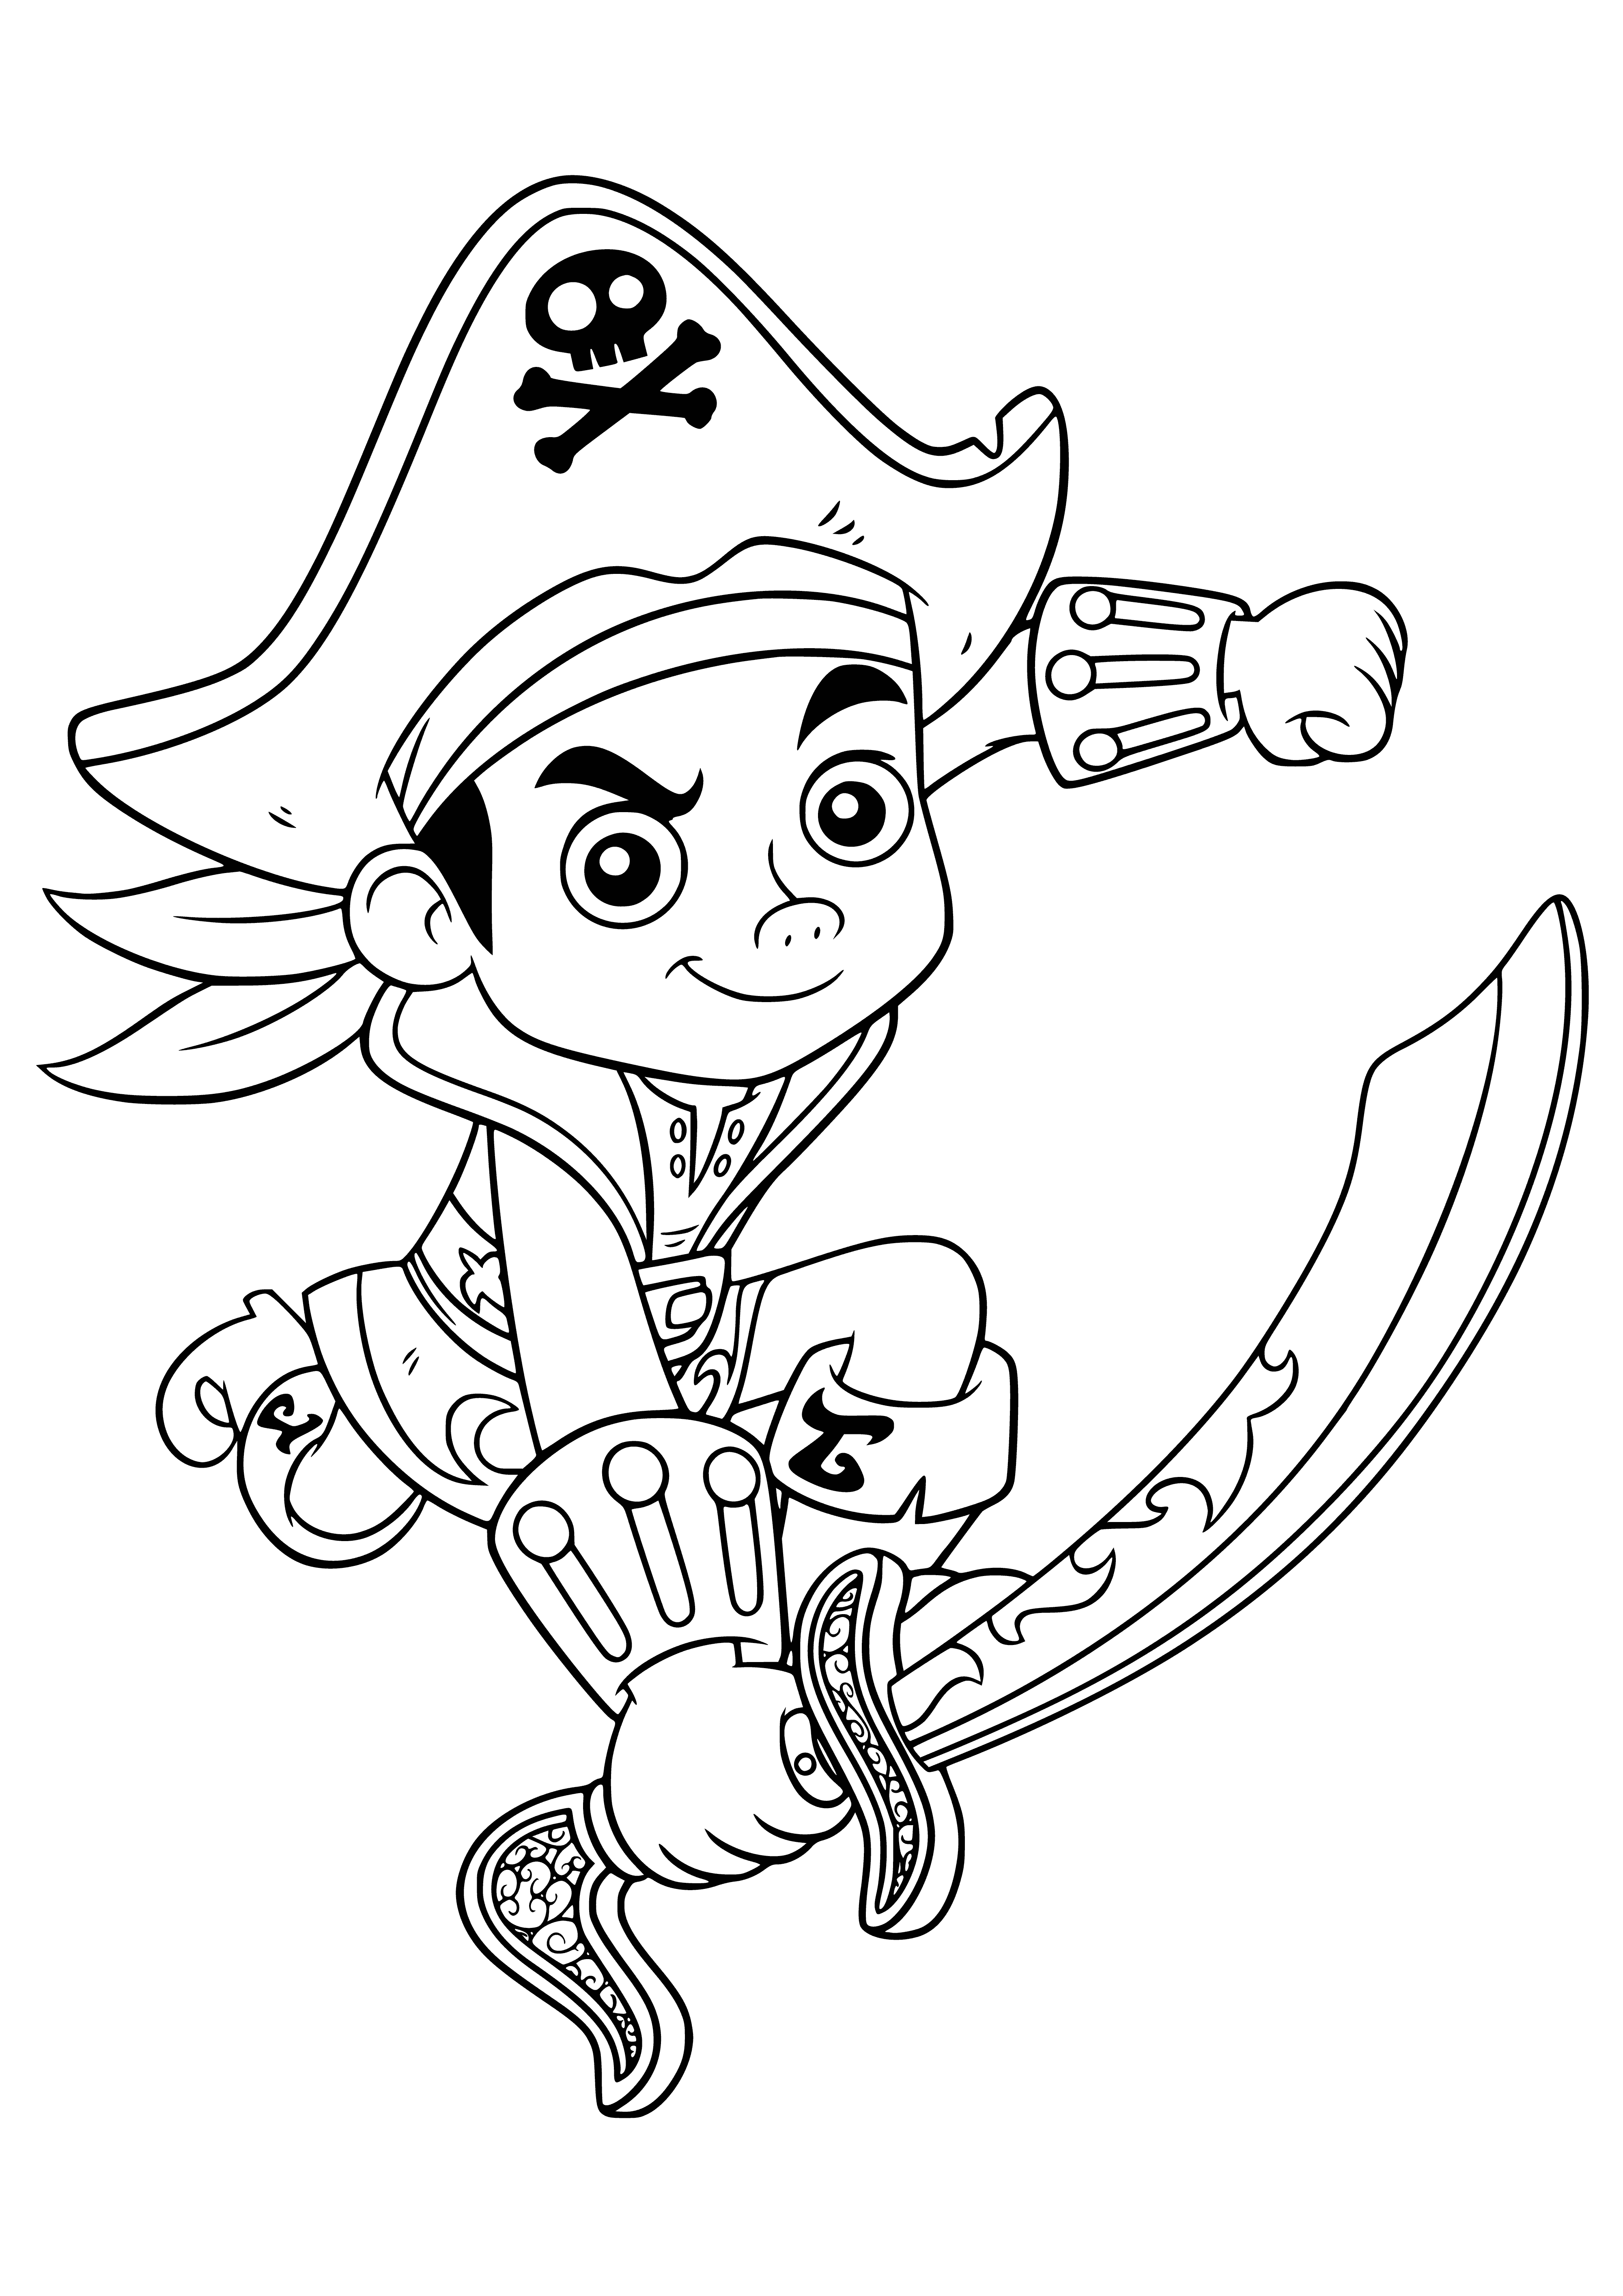 coloring page: Jake is an adventurous explorer who takes on anything with his saber and friends by his side. #explorer #brave